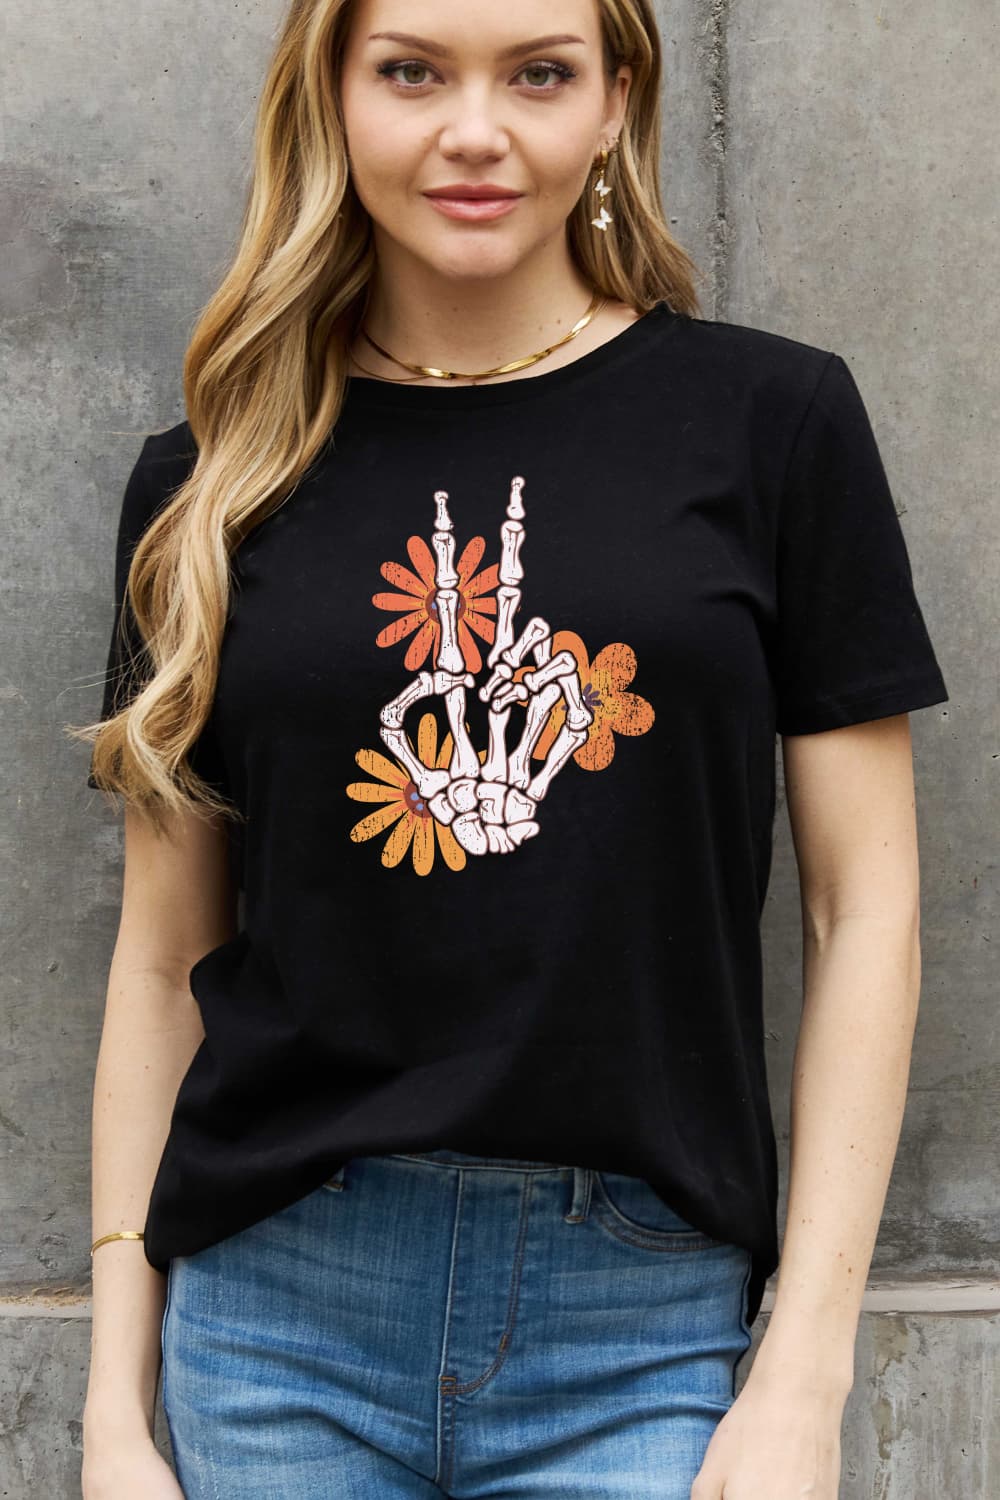 Simply Love Skeleton Hand Graphic Cotton Tee